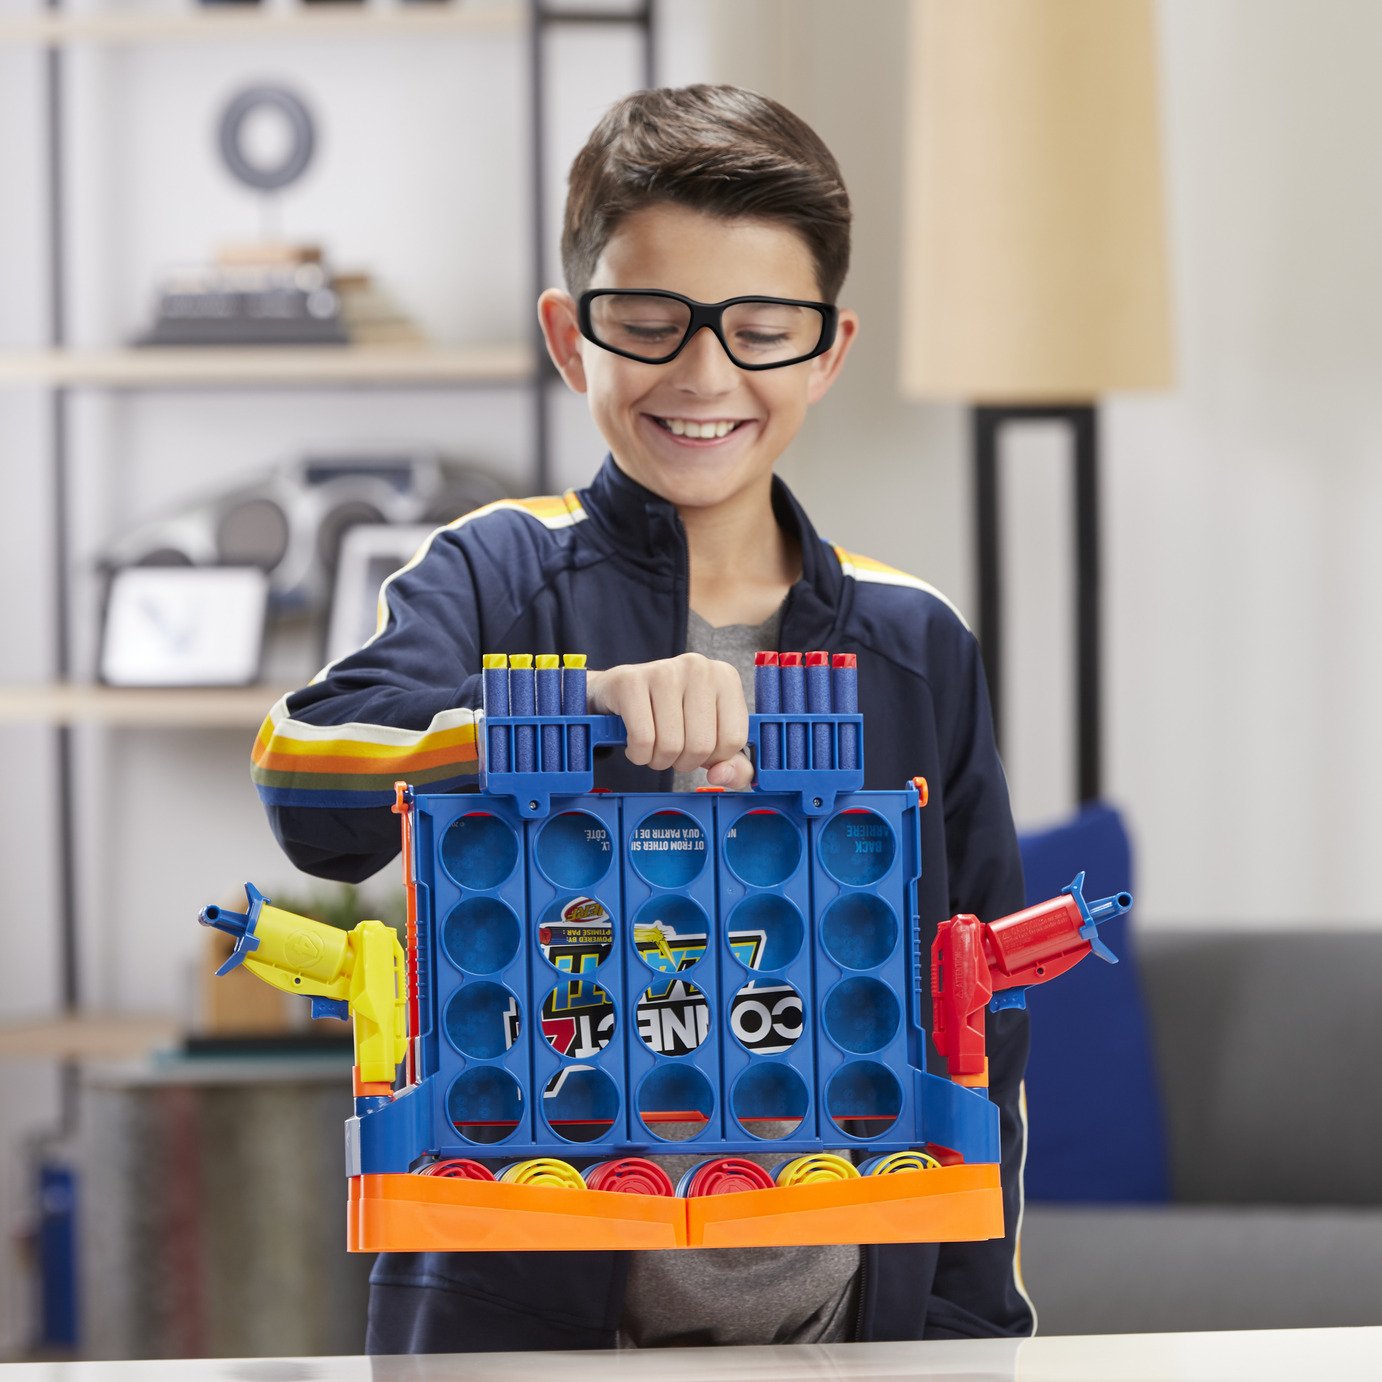 Connect 4 Nerf by Hasbro Gaming Review